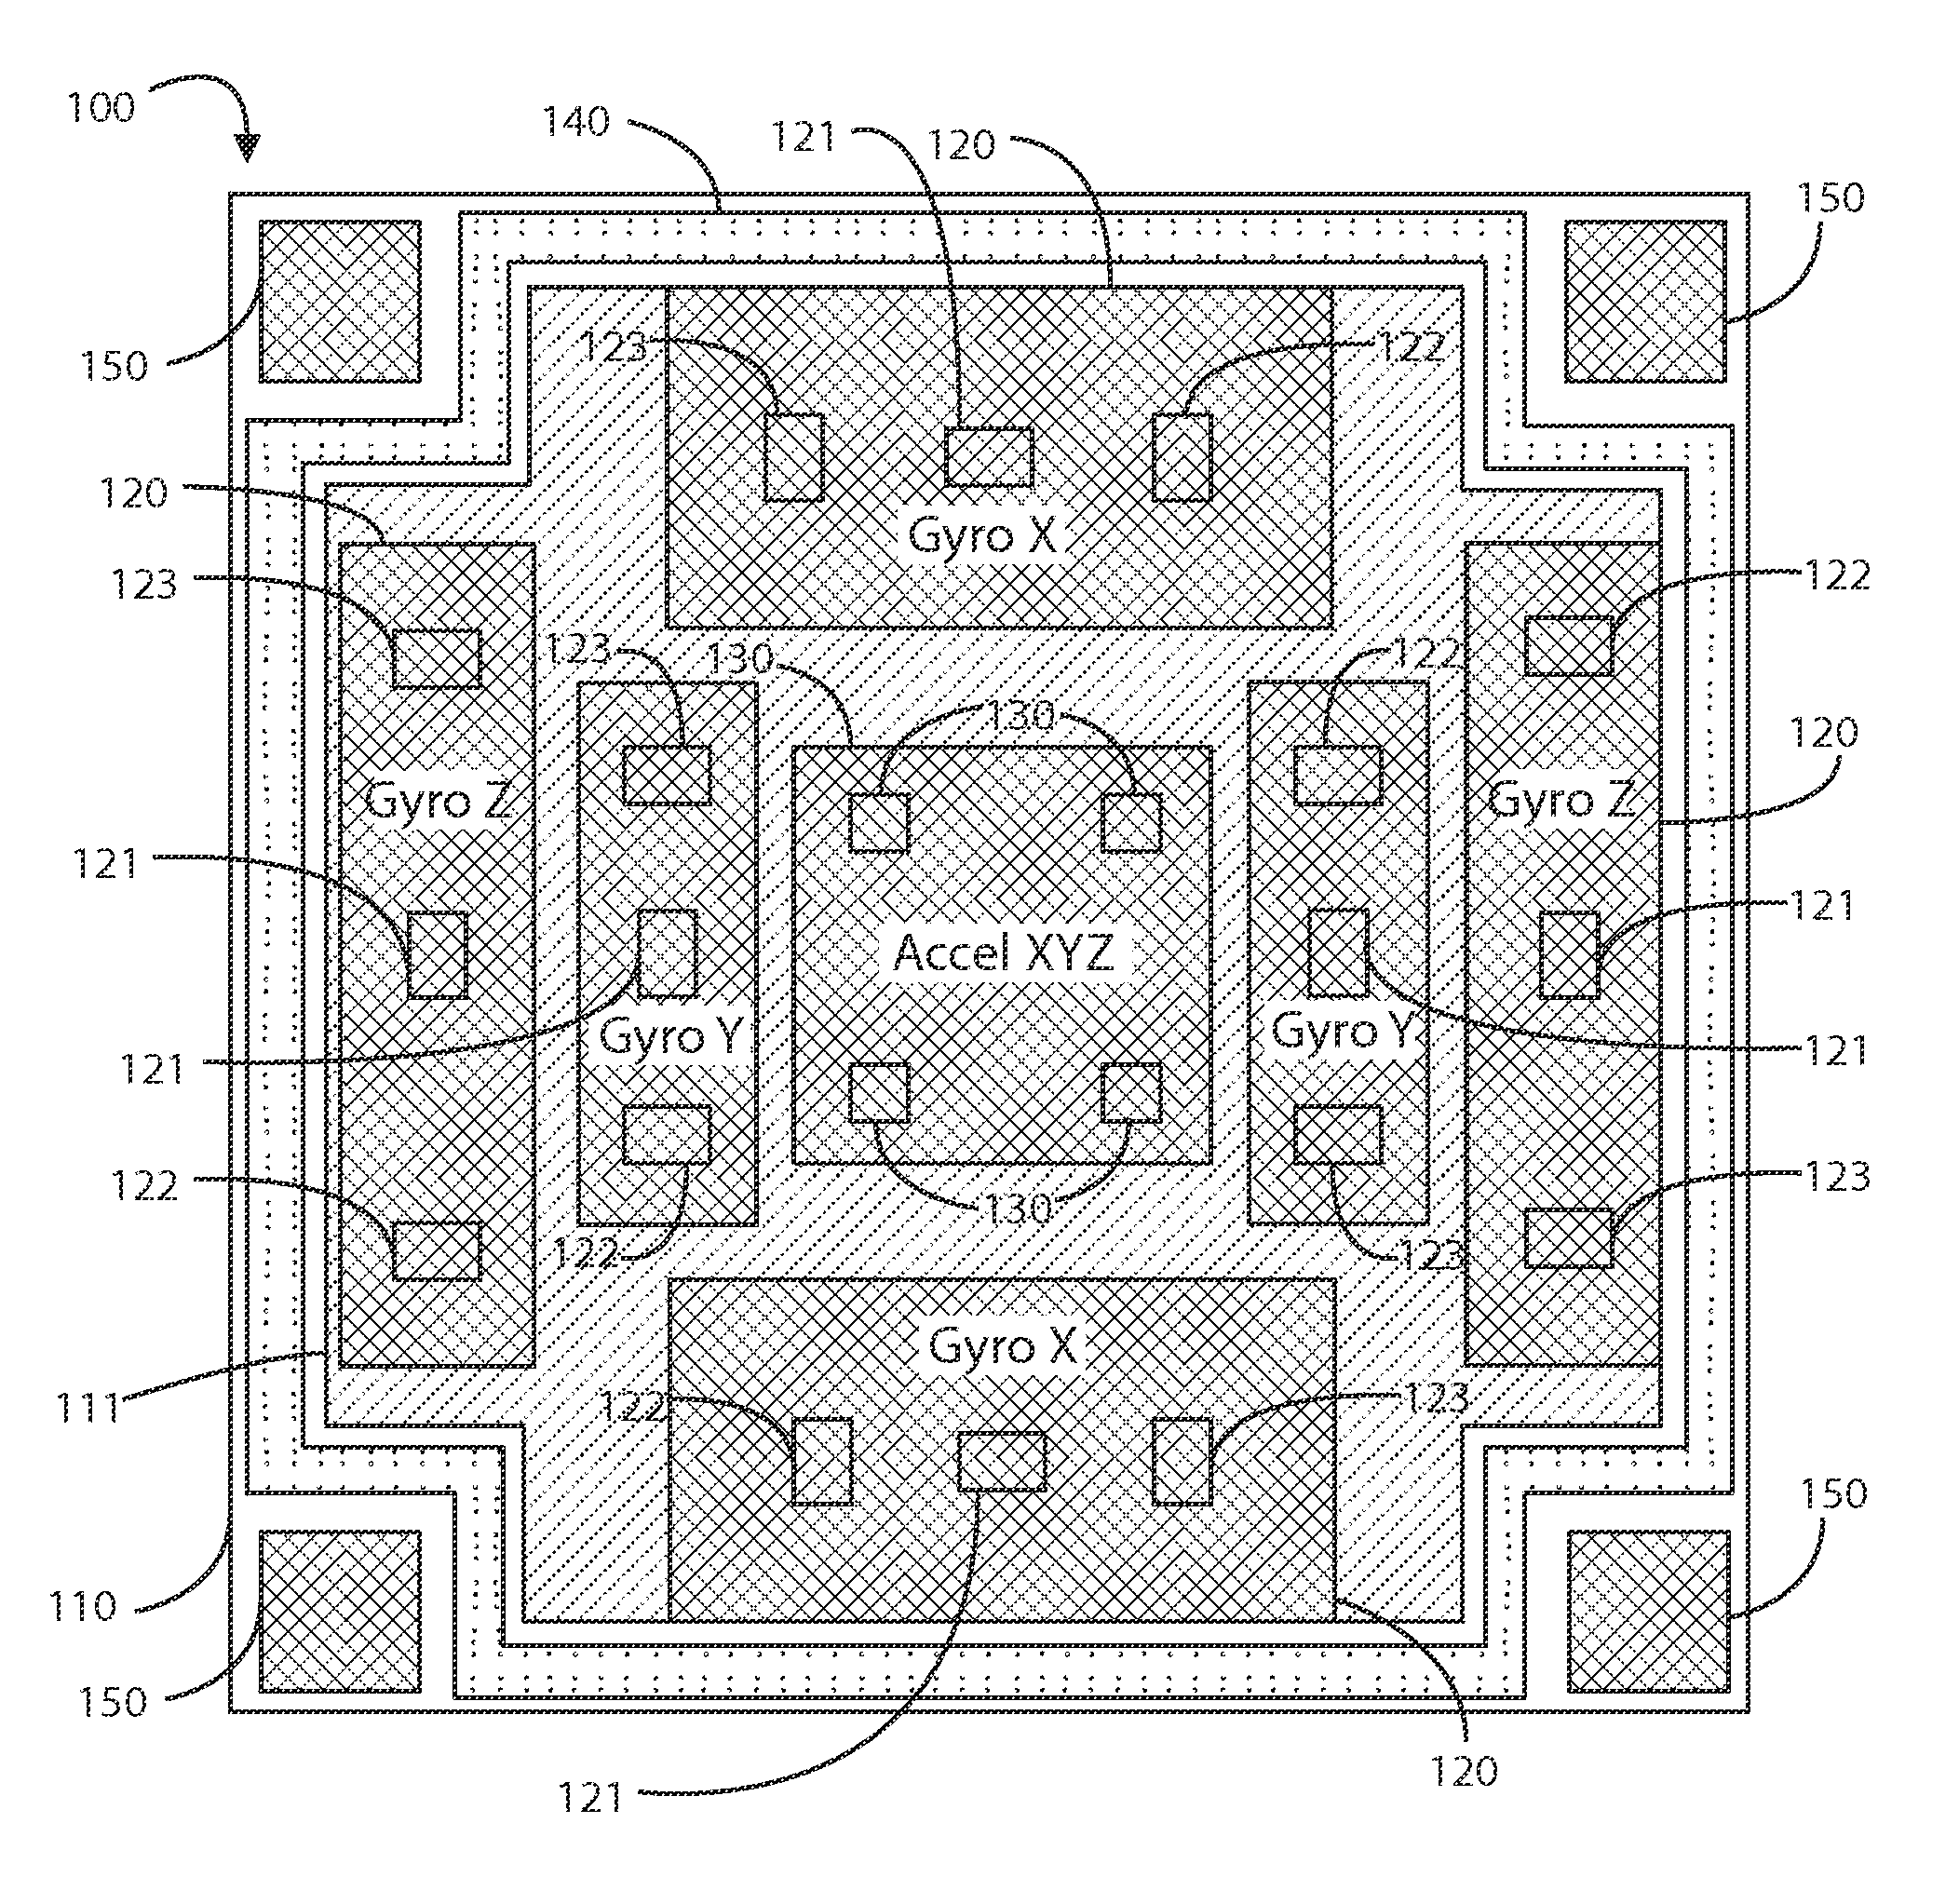 Multi-axis integrated MEMS inertial sensing device on single packaged chip